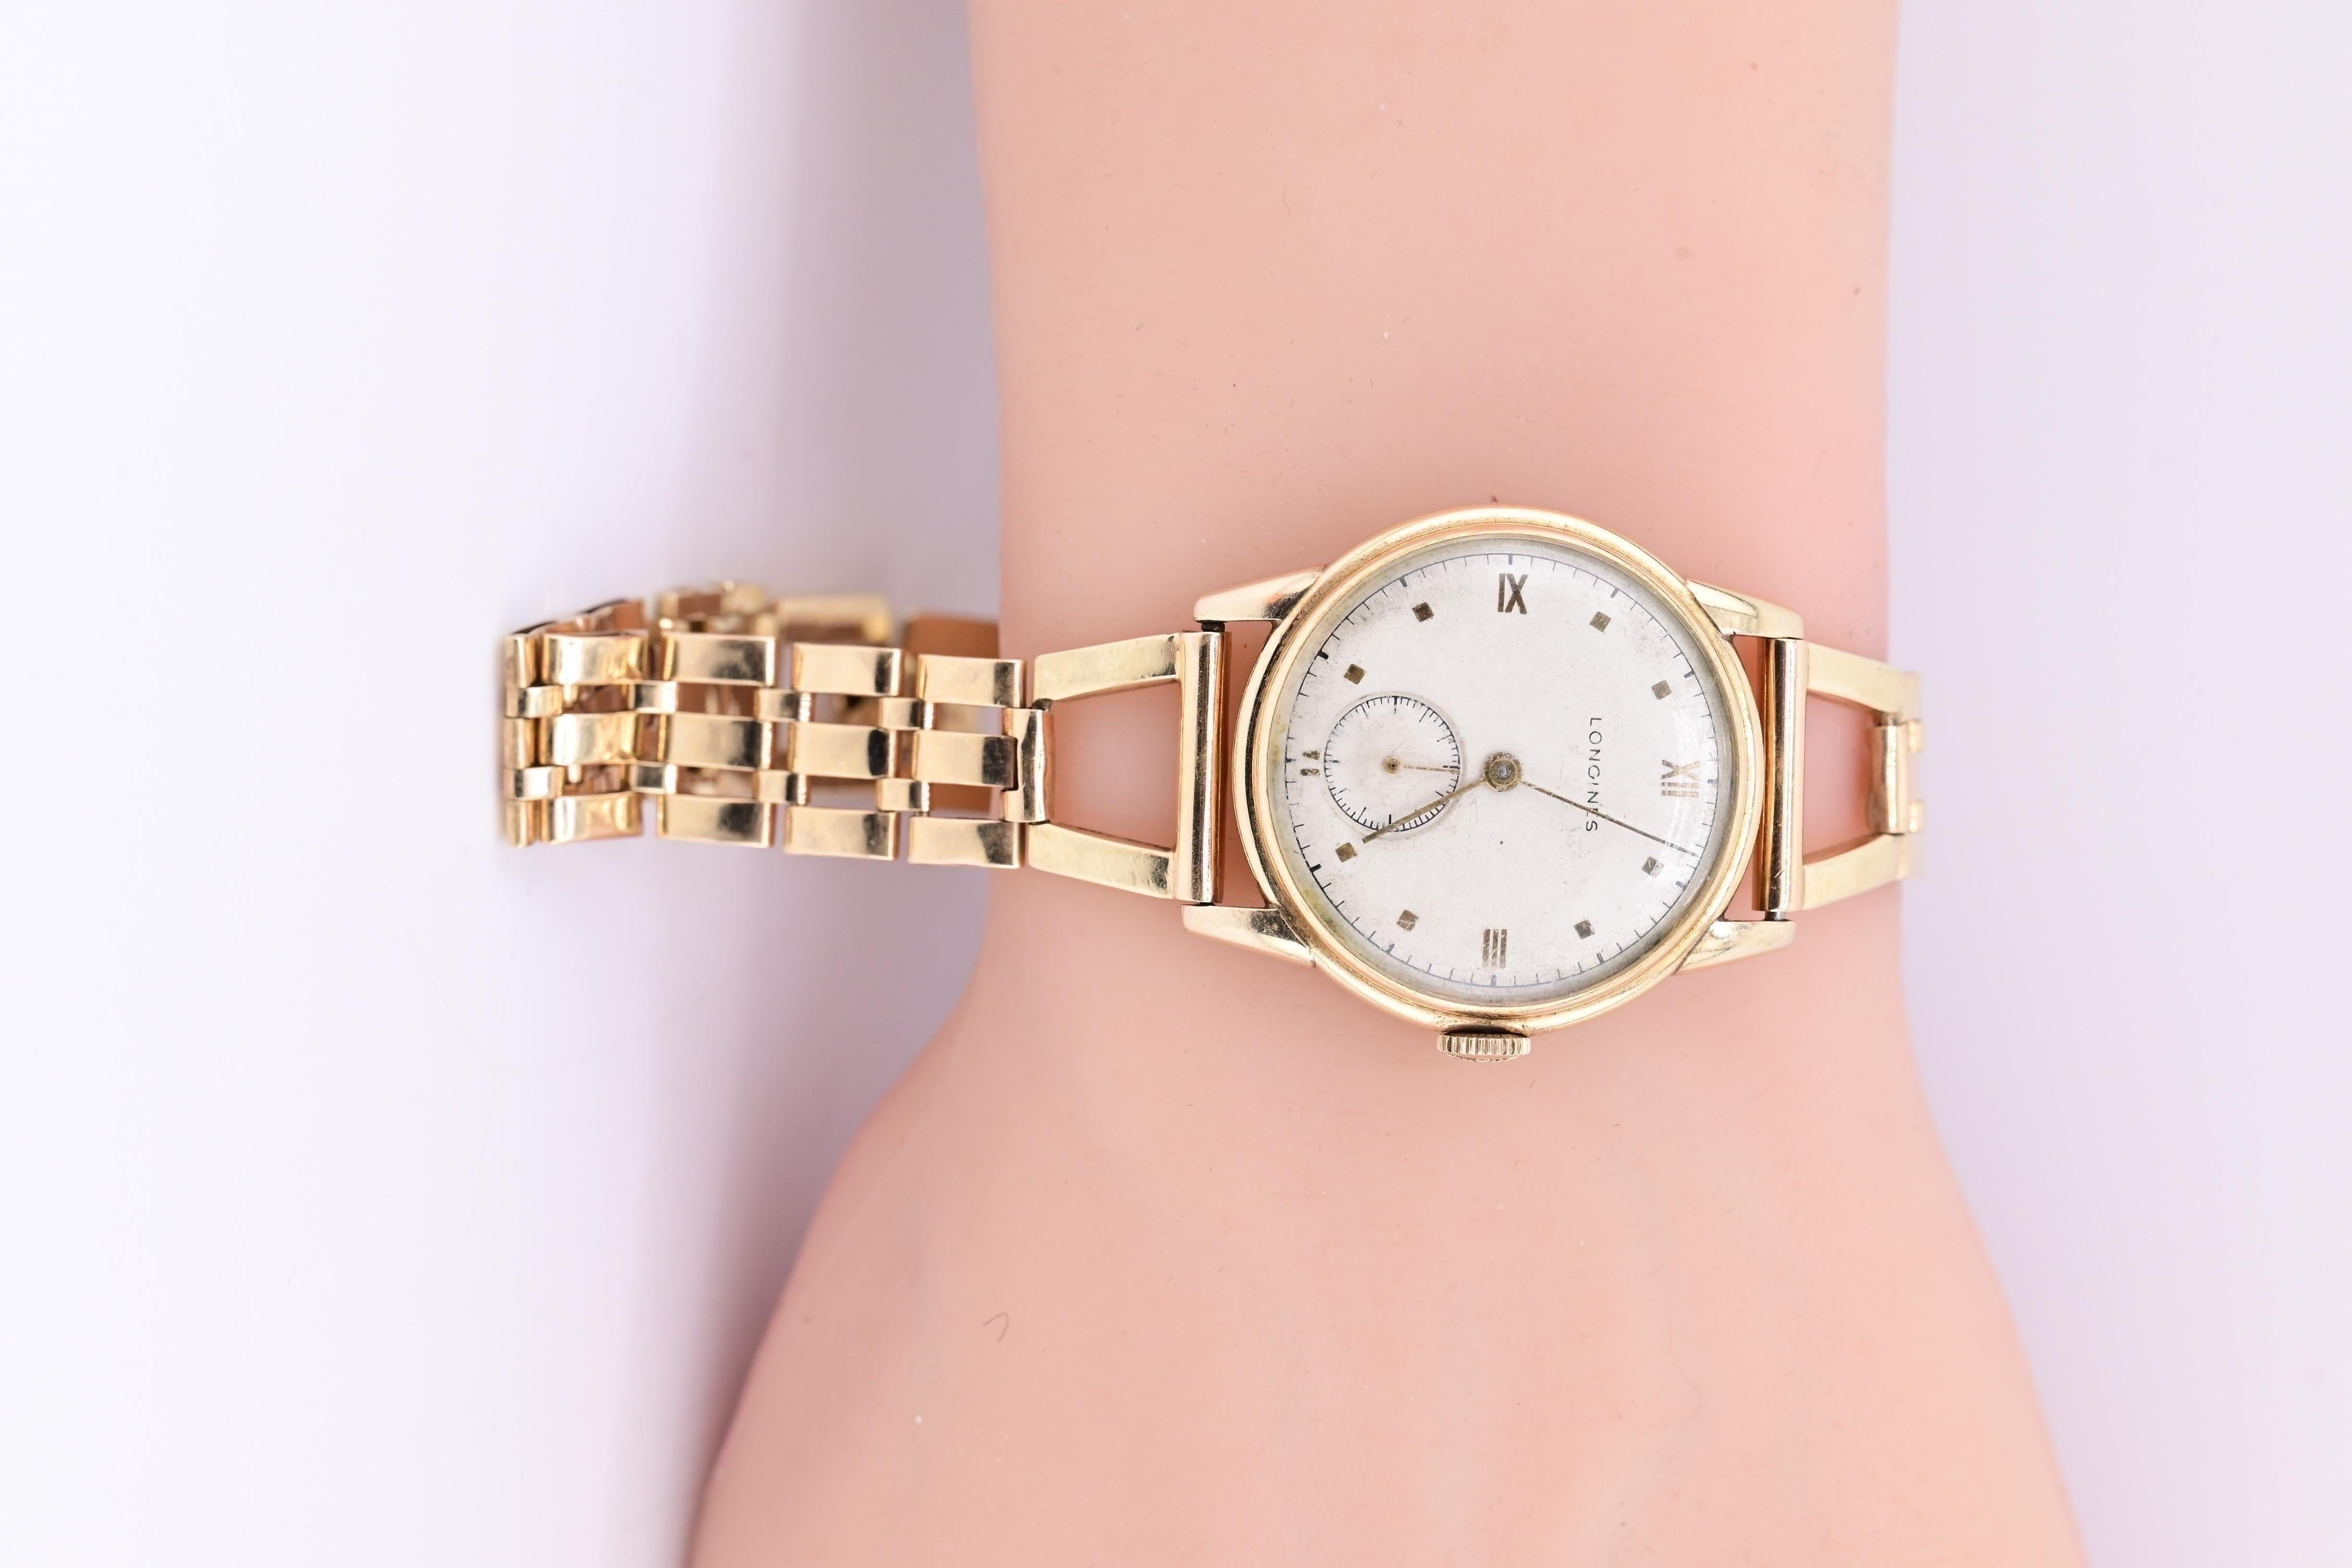 This LONGINES Calatrava Vintage Watch is a true gem from the 1940s, made with 14K yellow gold. Crafted in Switzerland, this unisex wristwatch has a mechanical (manual) movement and an analog display. The round watch shape is complemented by a snap